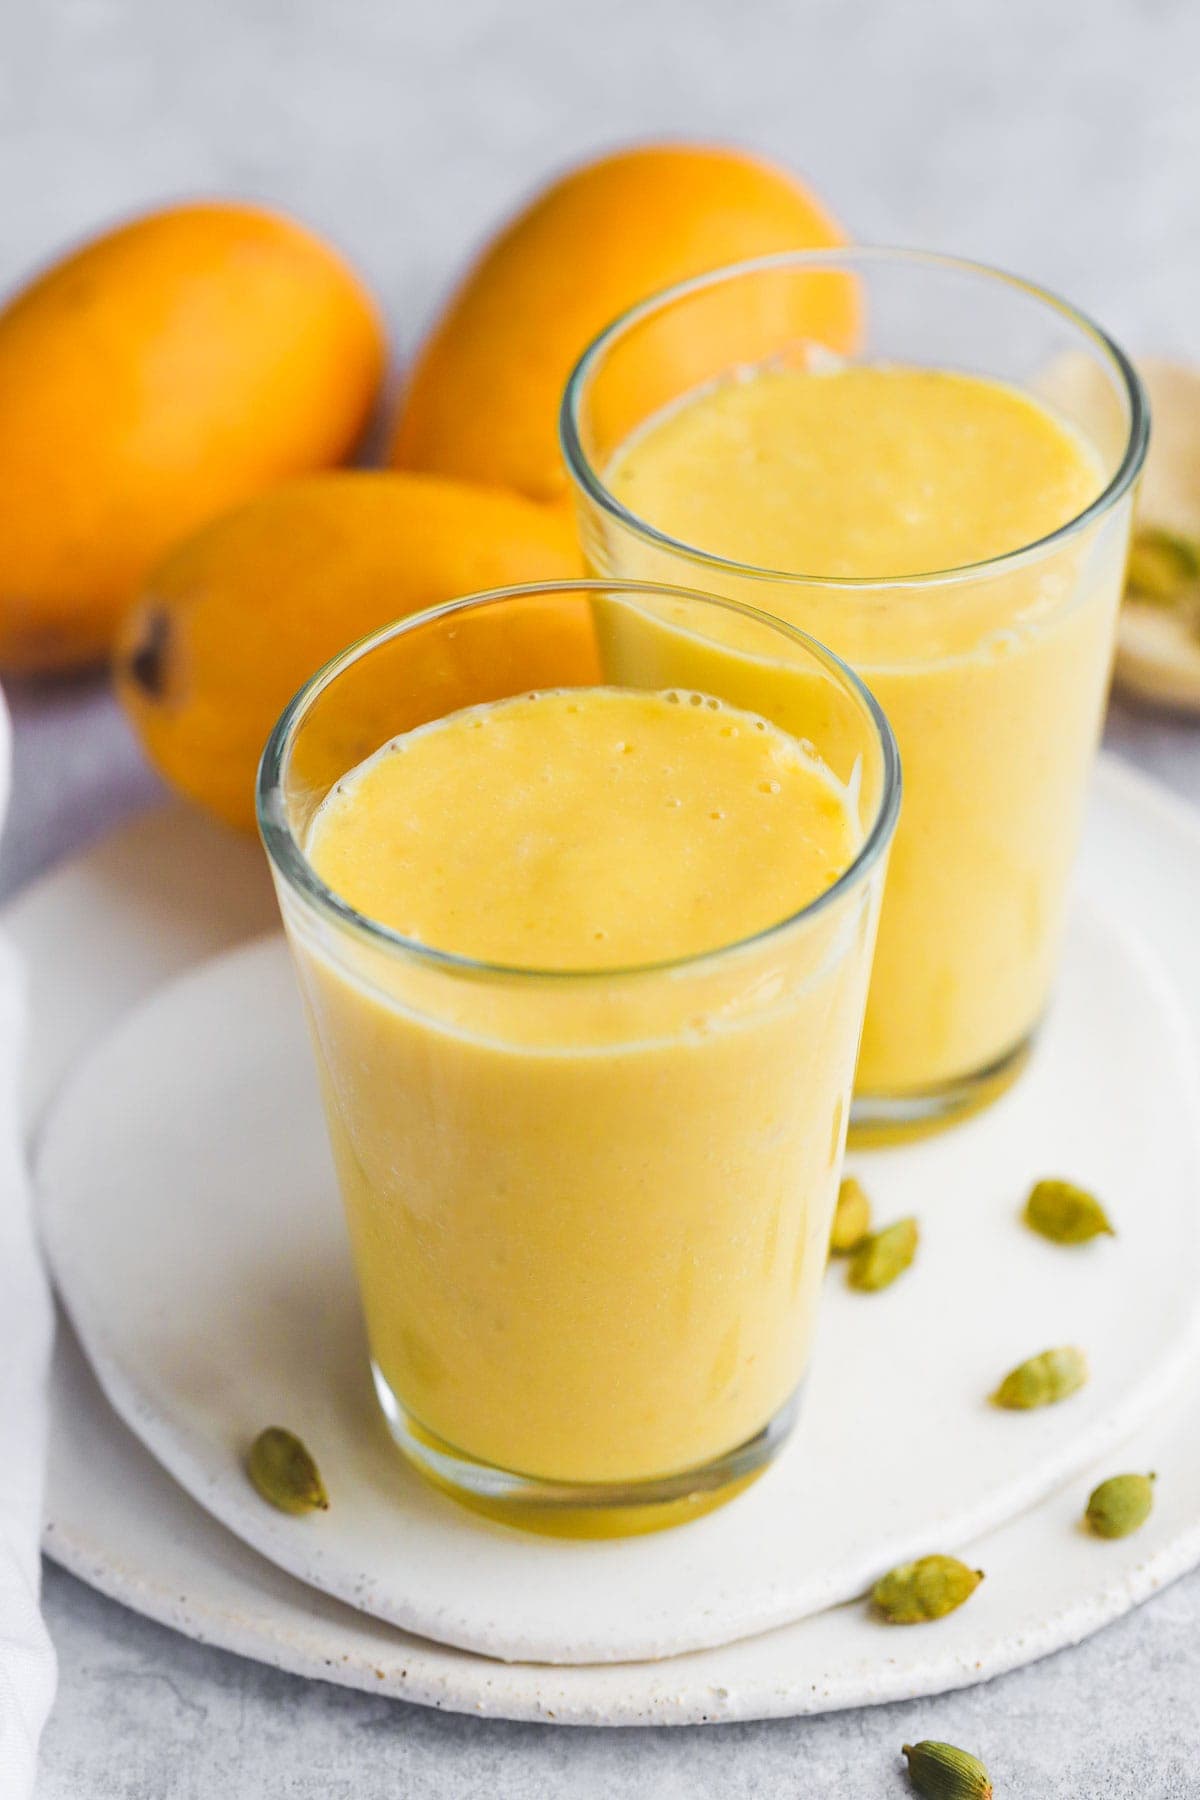 2 glasses with mango lassi on ceramic white tray, 3 mangoes in the background, and some green cardamom pods